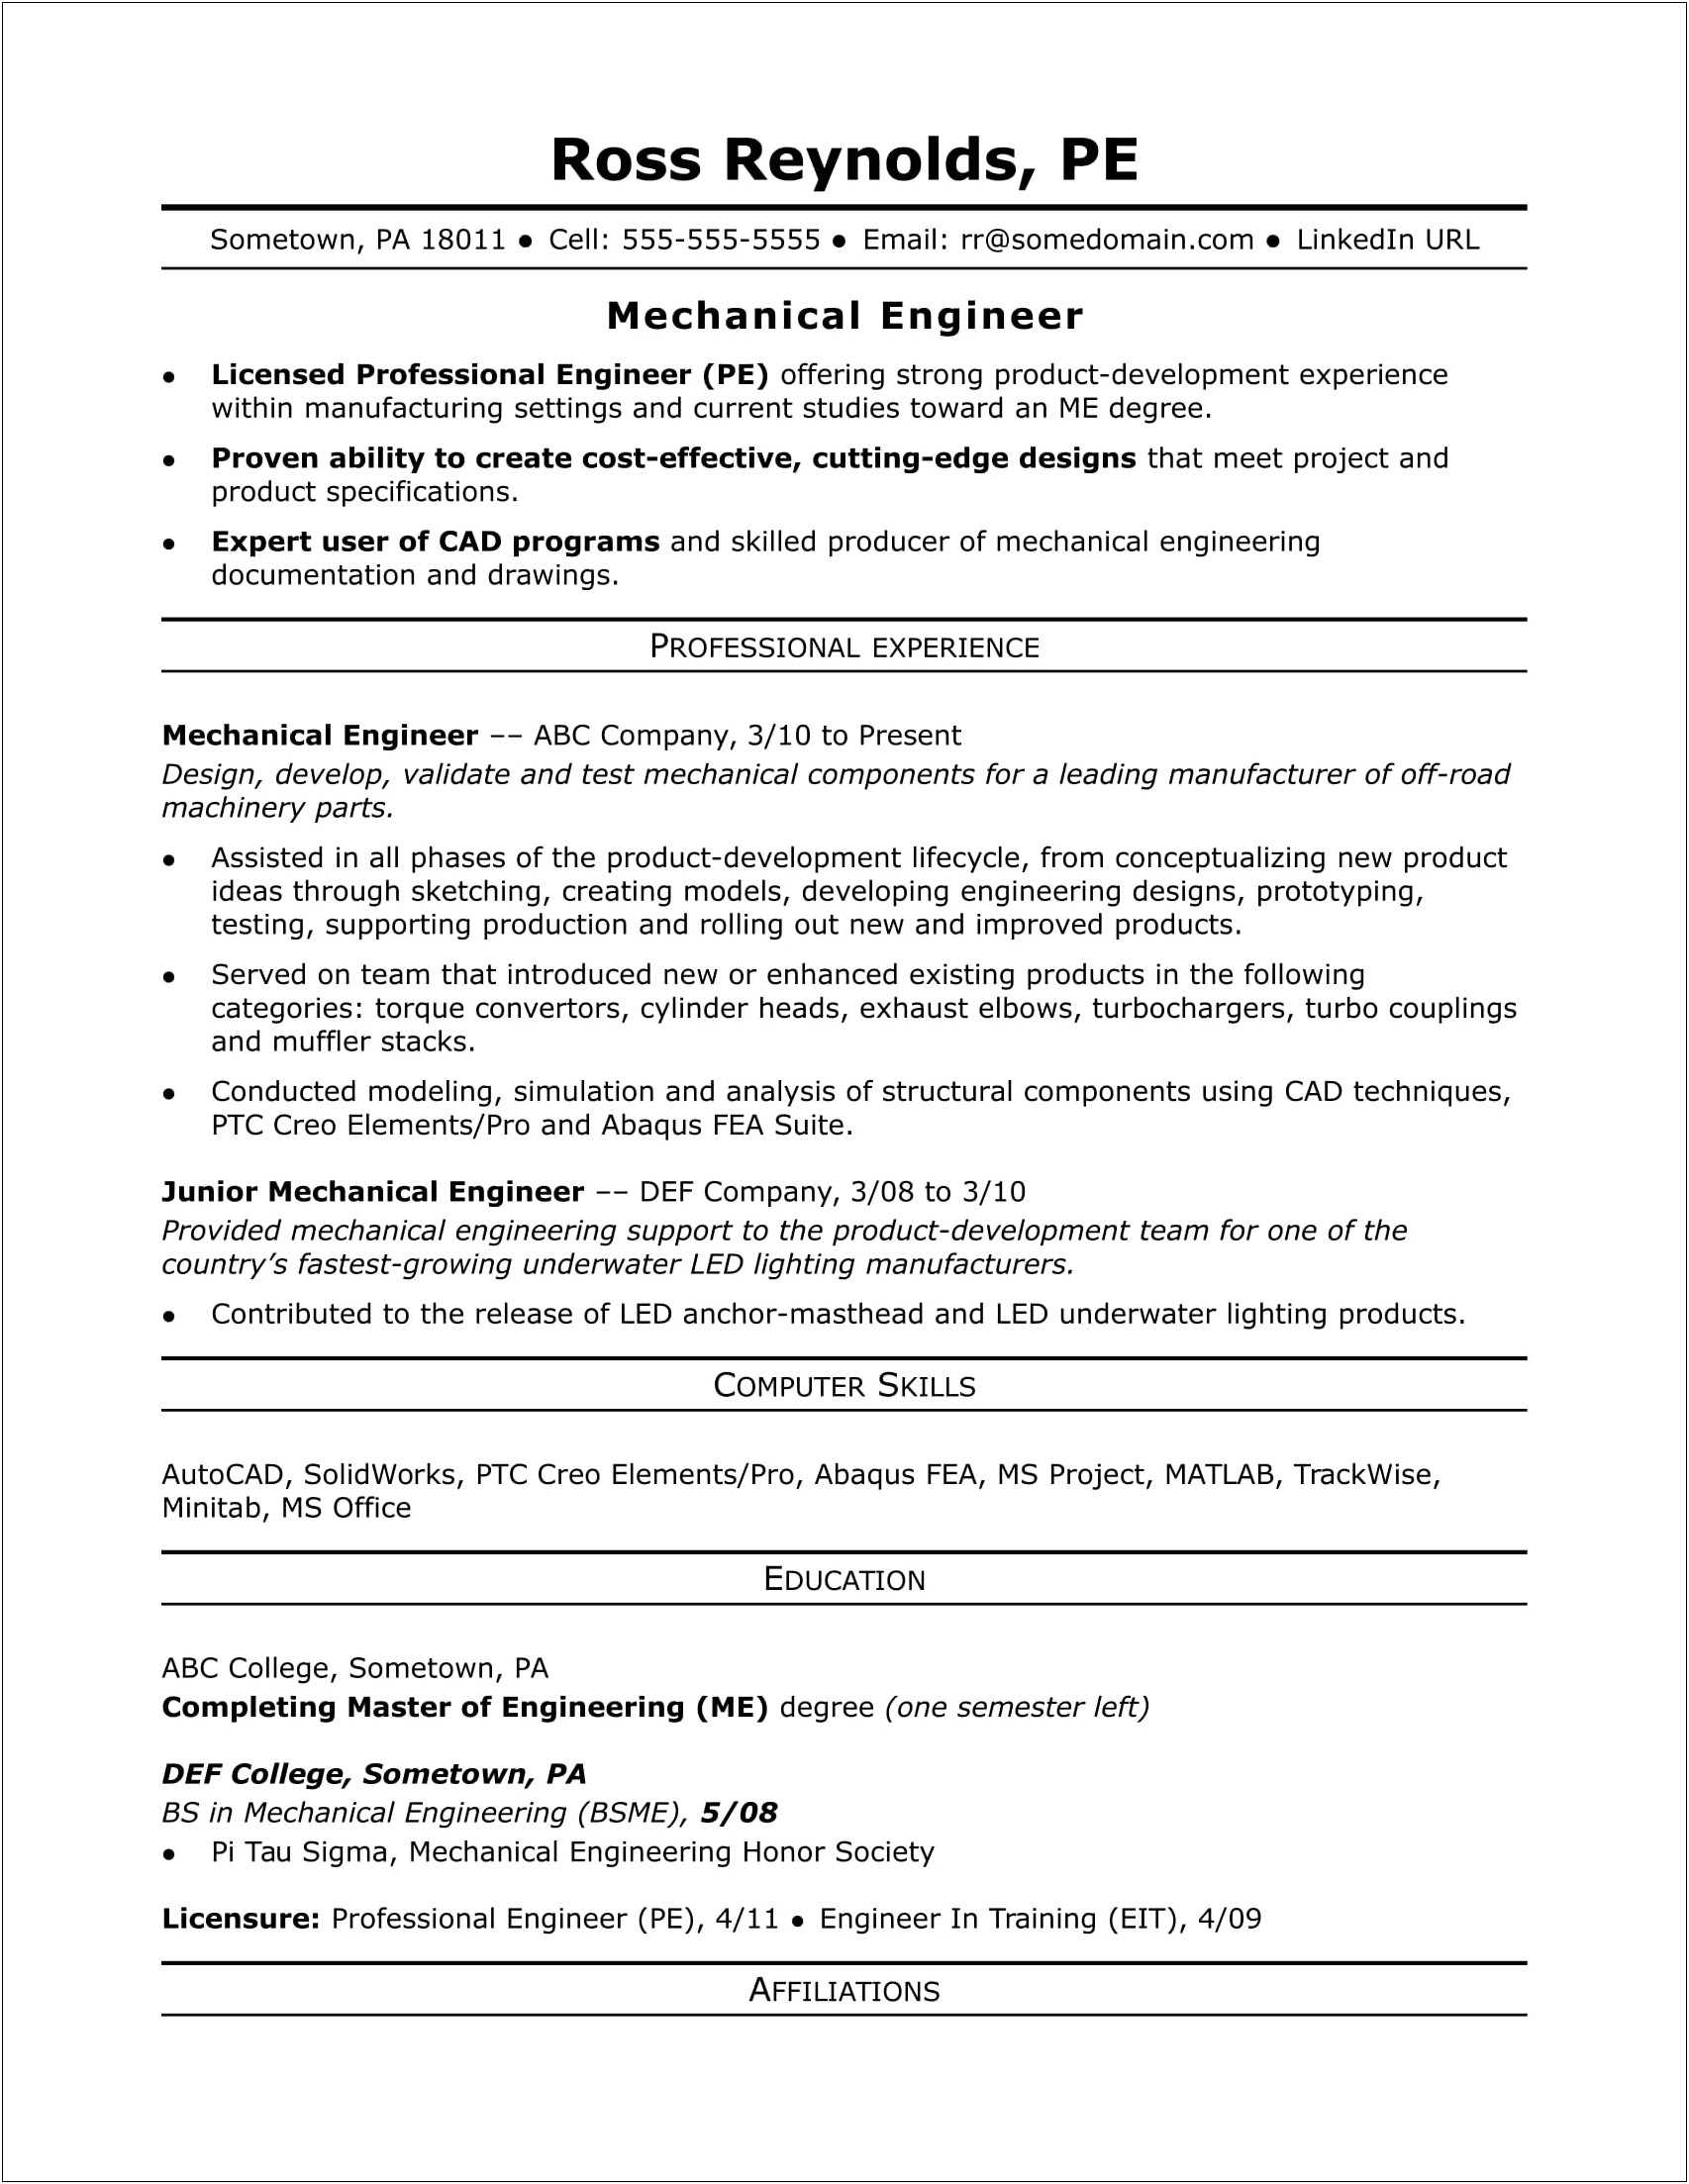 Good Resume Summary Statement For Mechanical Engineers